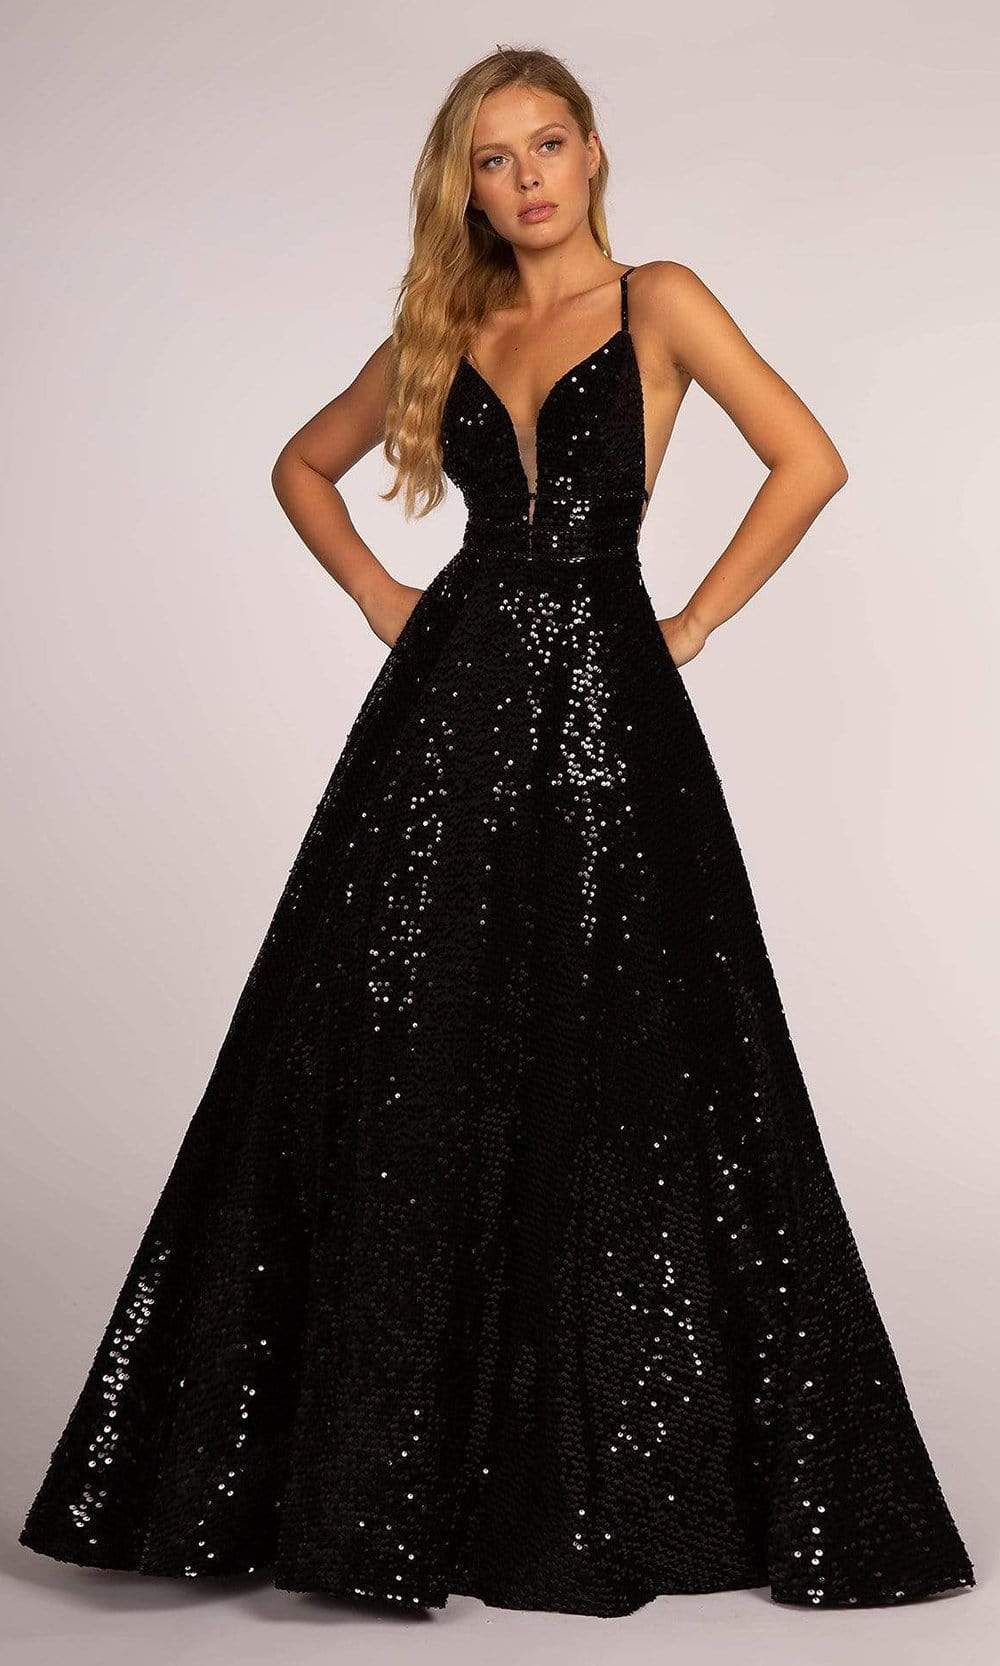 Top 10 Prom Dresses Sites To Consider For A Glamorous Evening